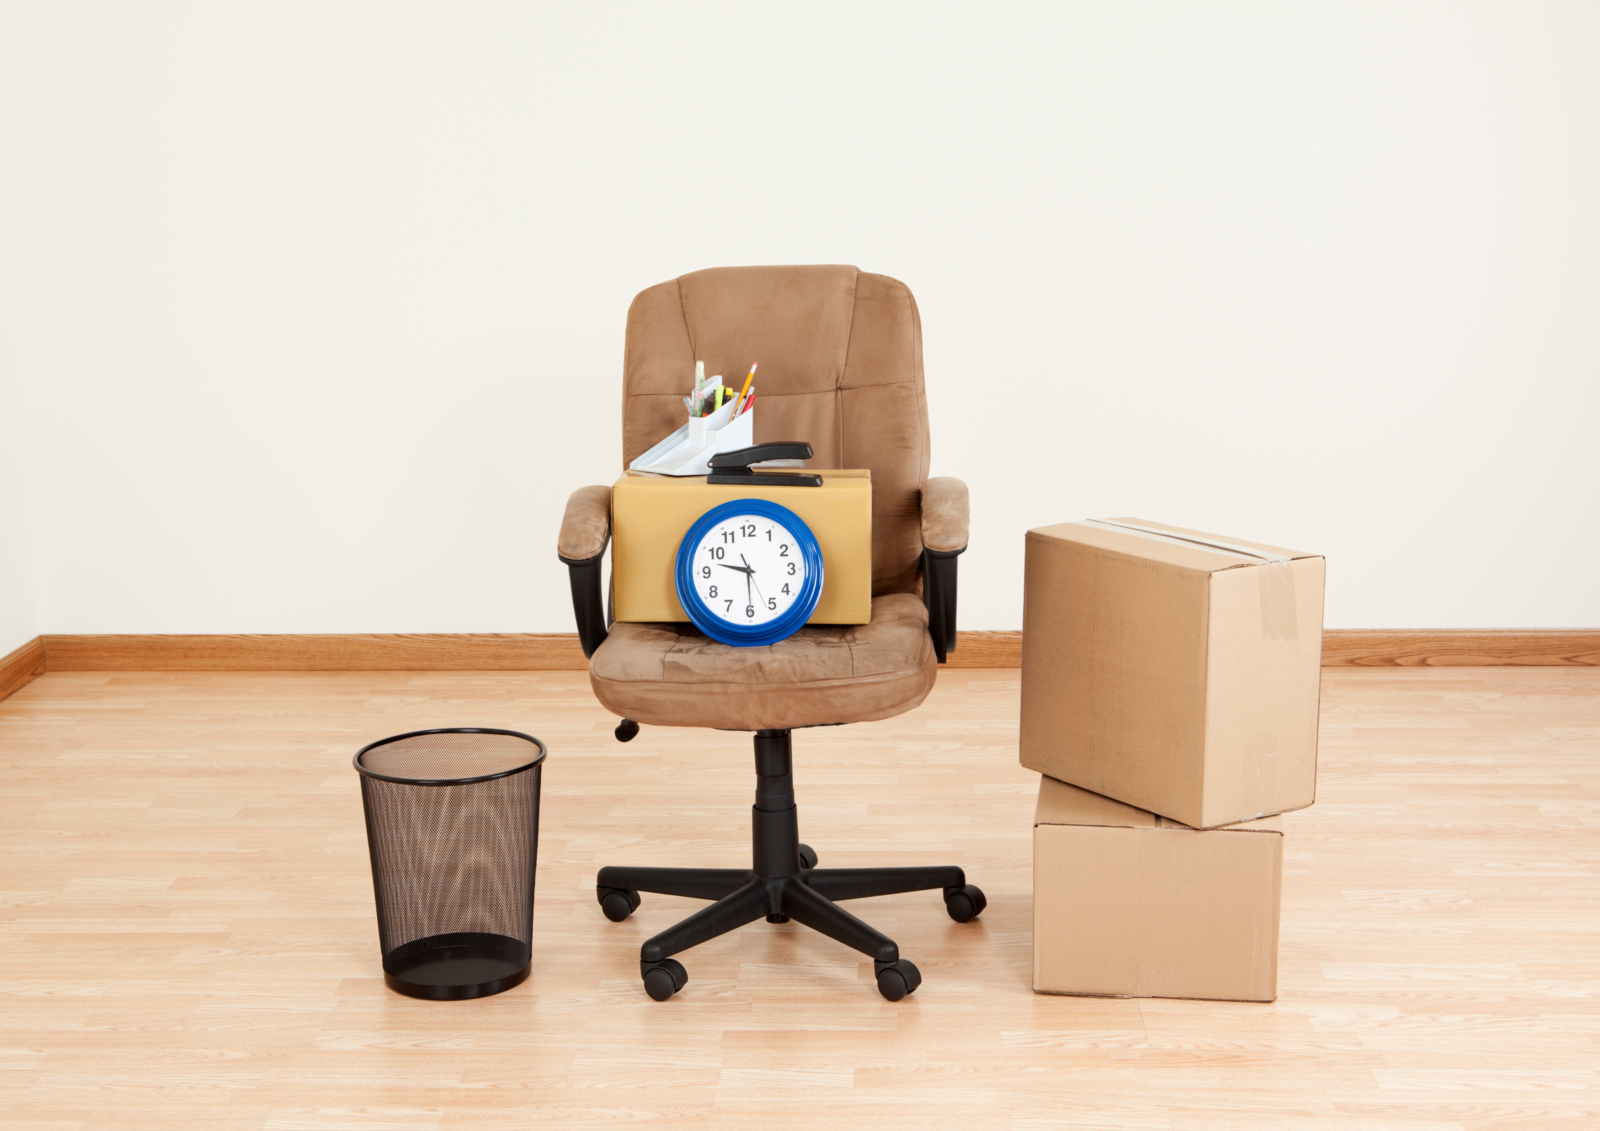 Planning an office Move? When is the right time and how can you plan ahead?